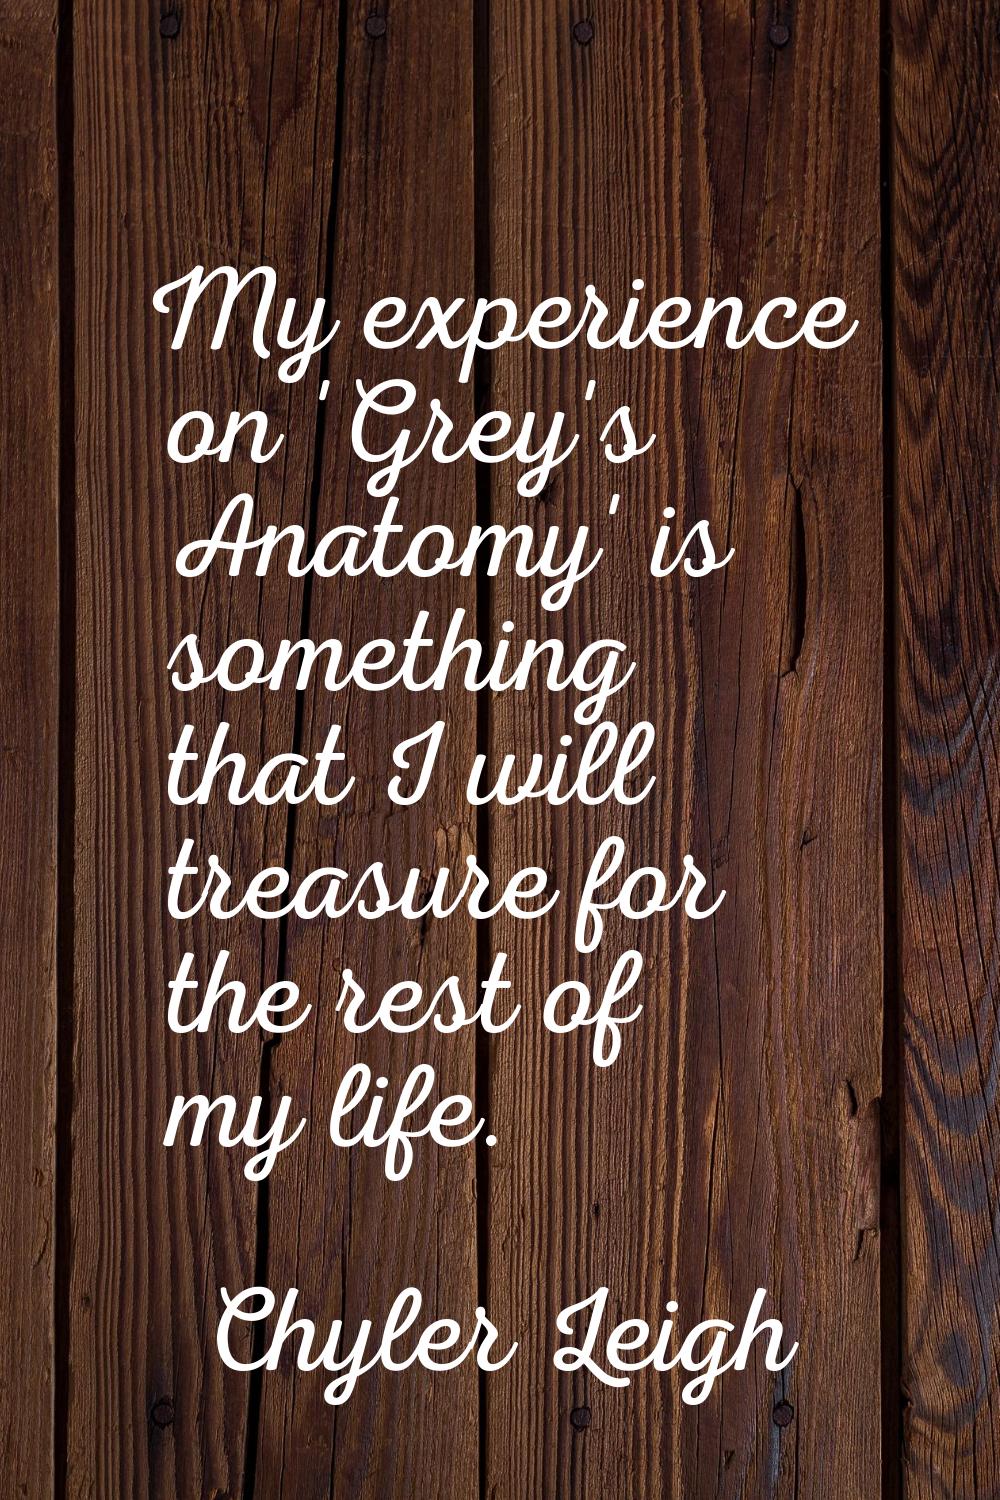 My experience on 'Grey's Anatomy' is something that I will treasure for the rest of my life.